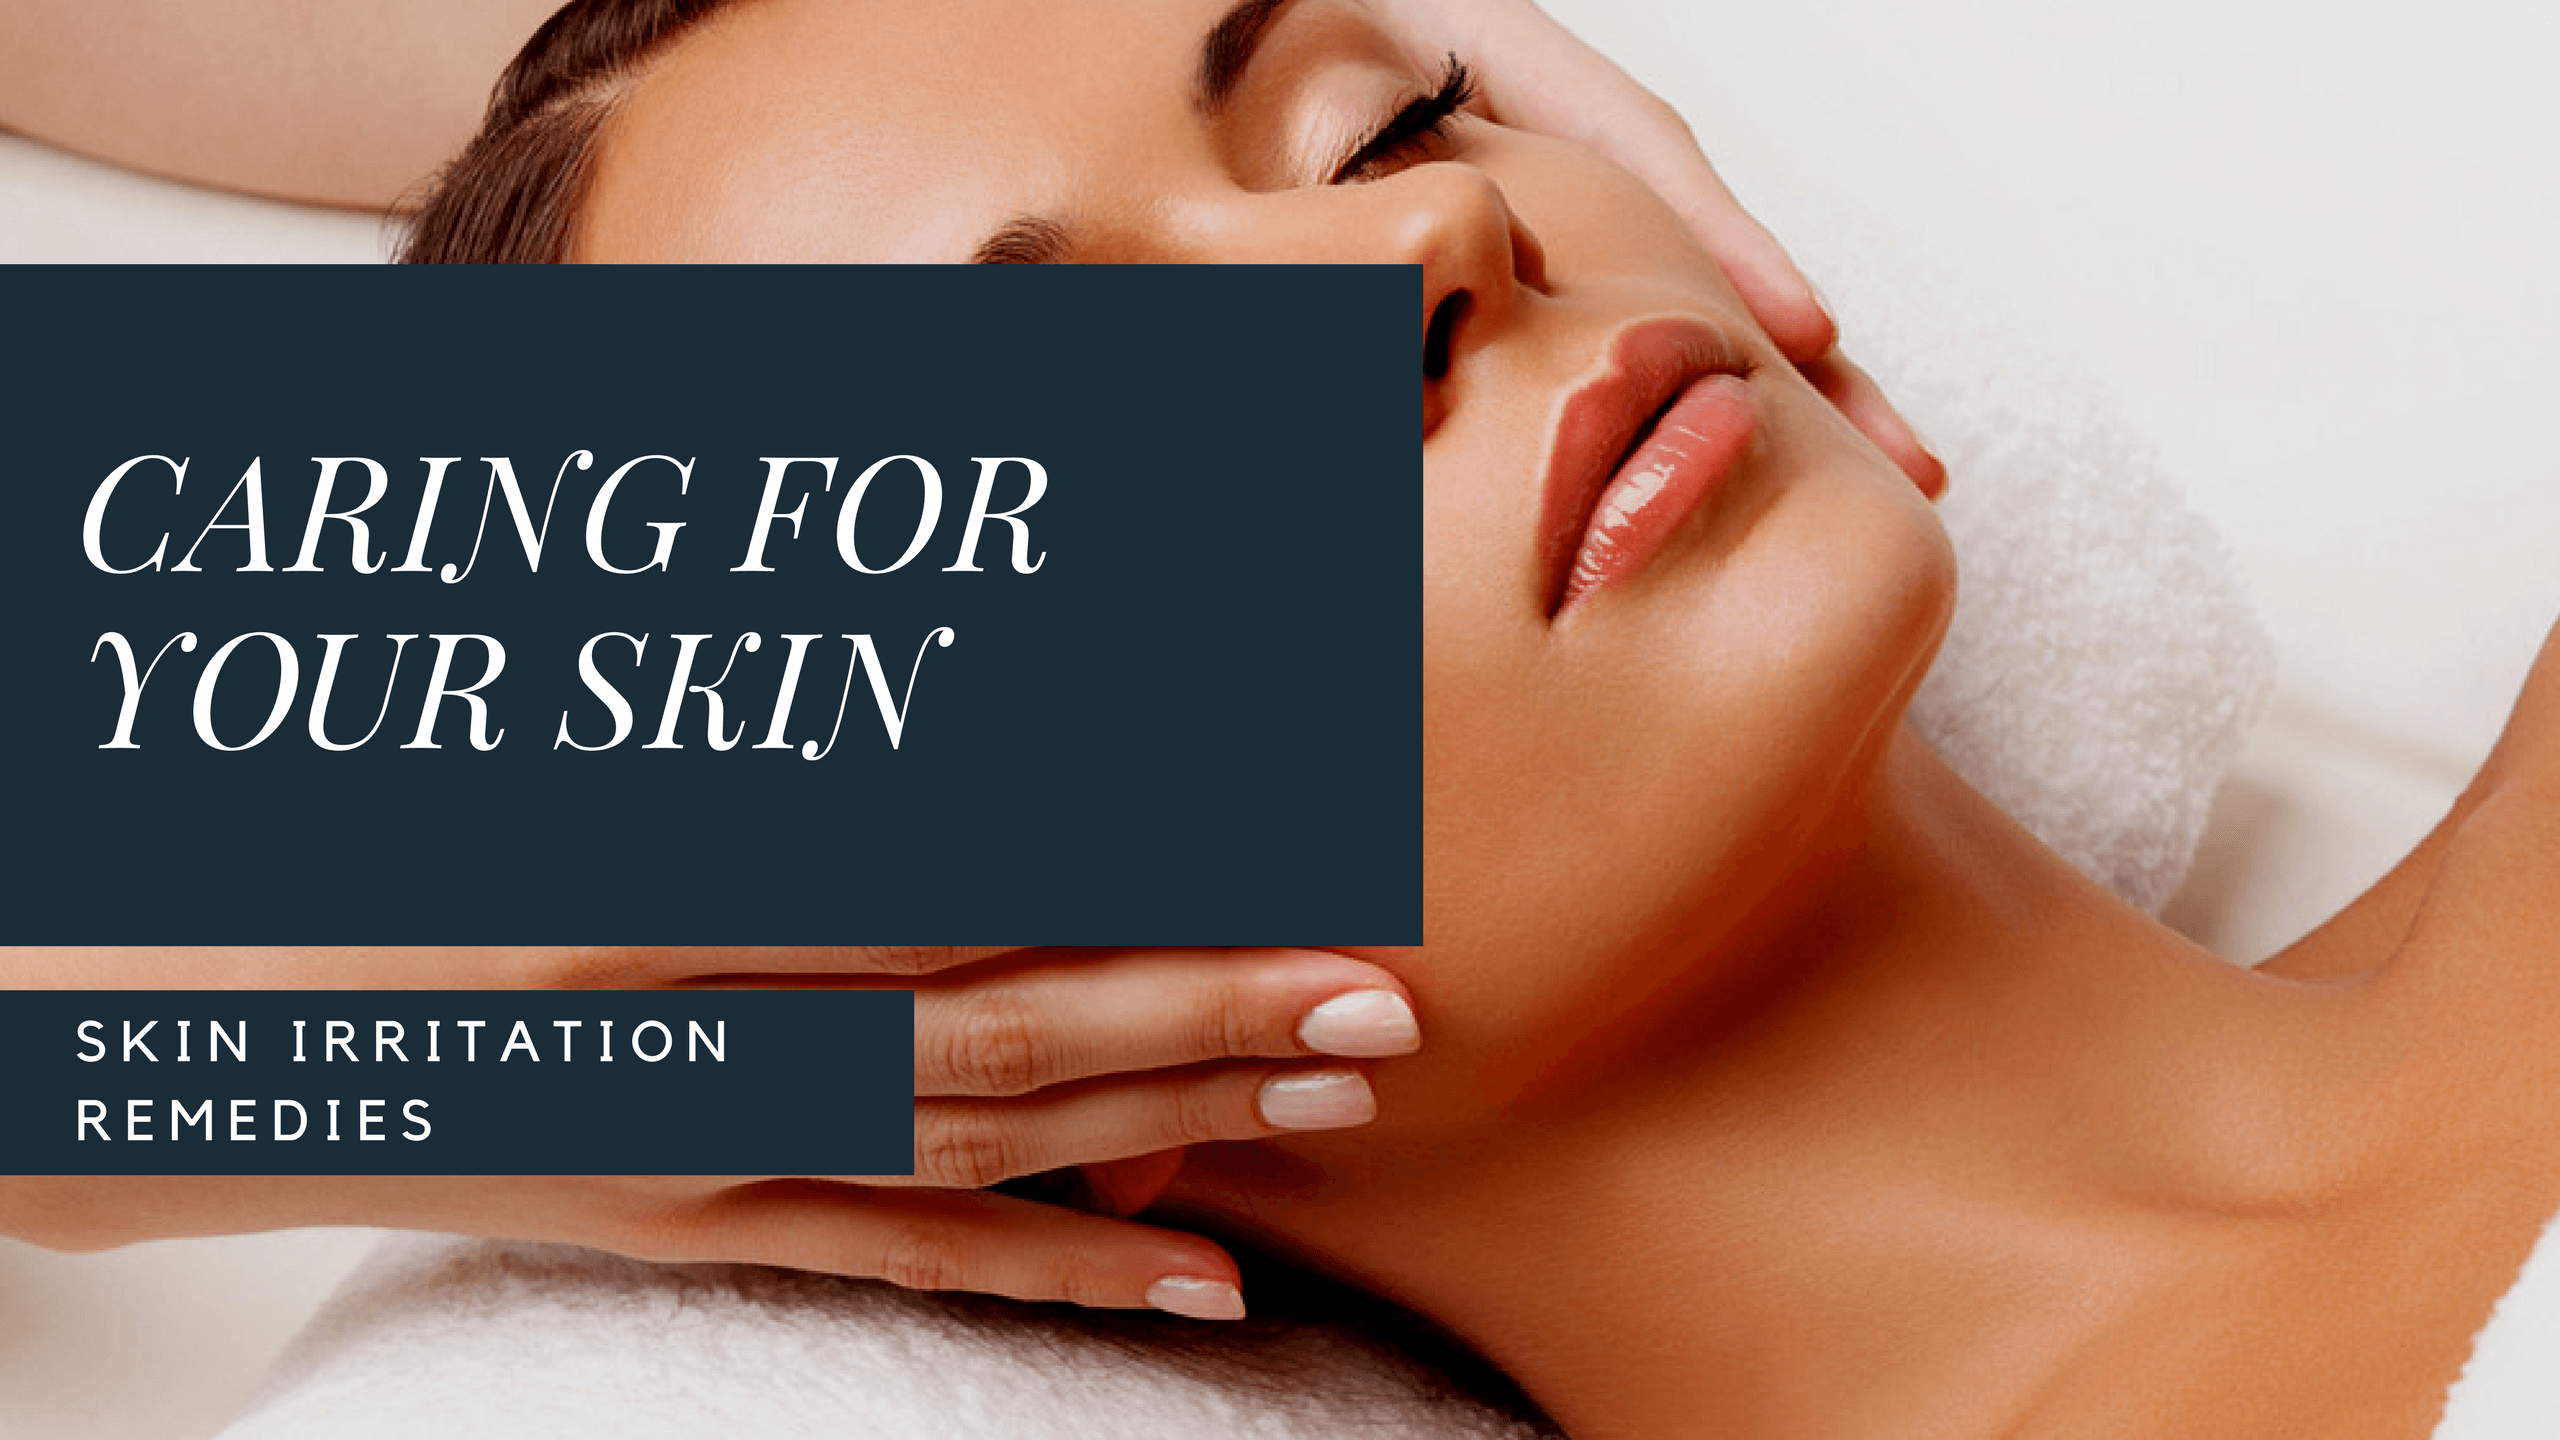 Caring for your skin